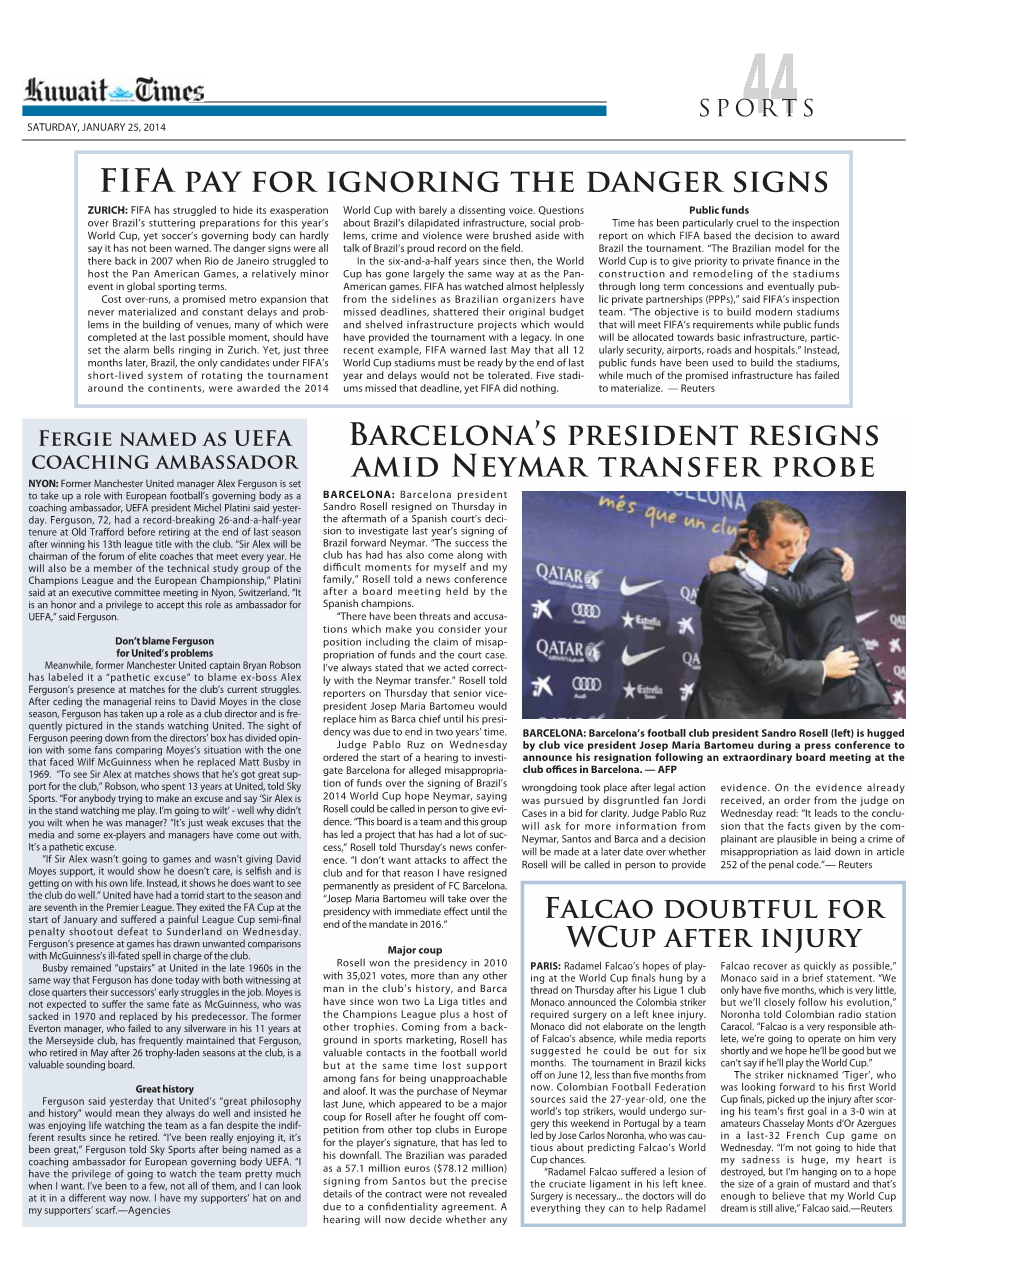 FIFA Pay for Ignoring the Danger Signs